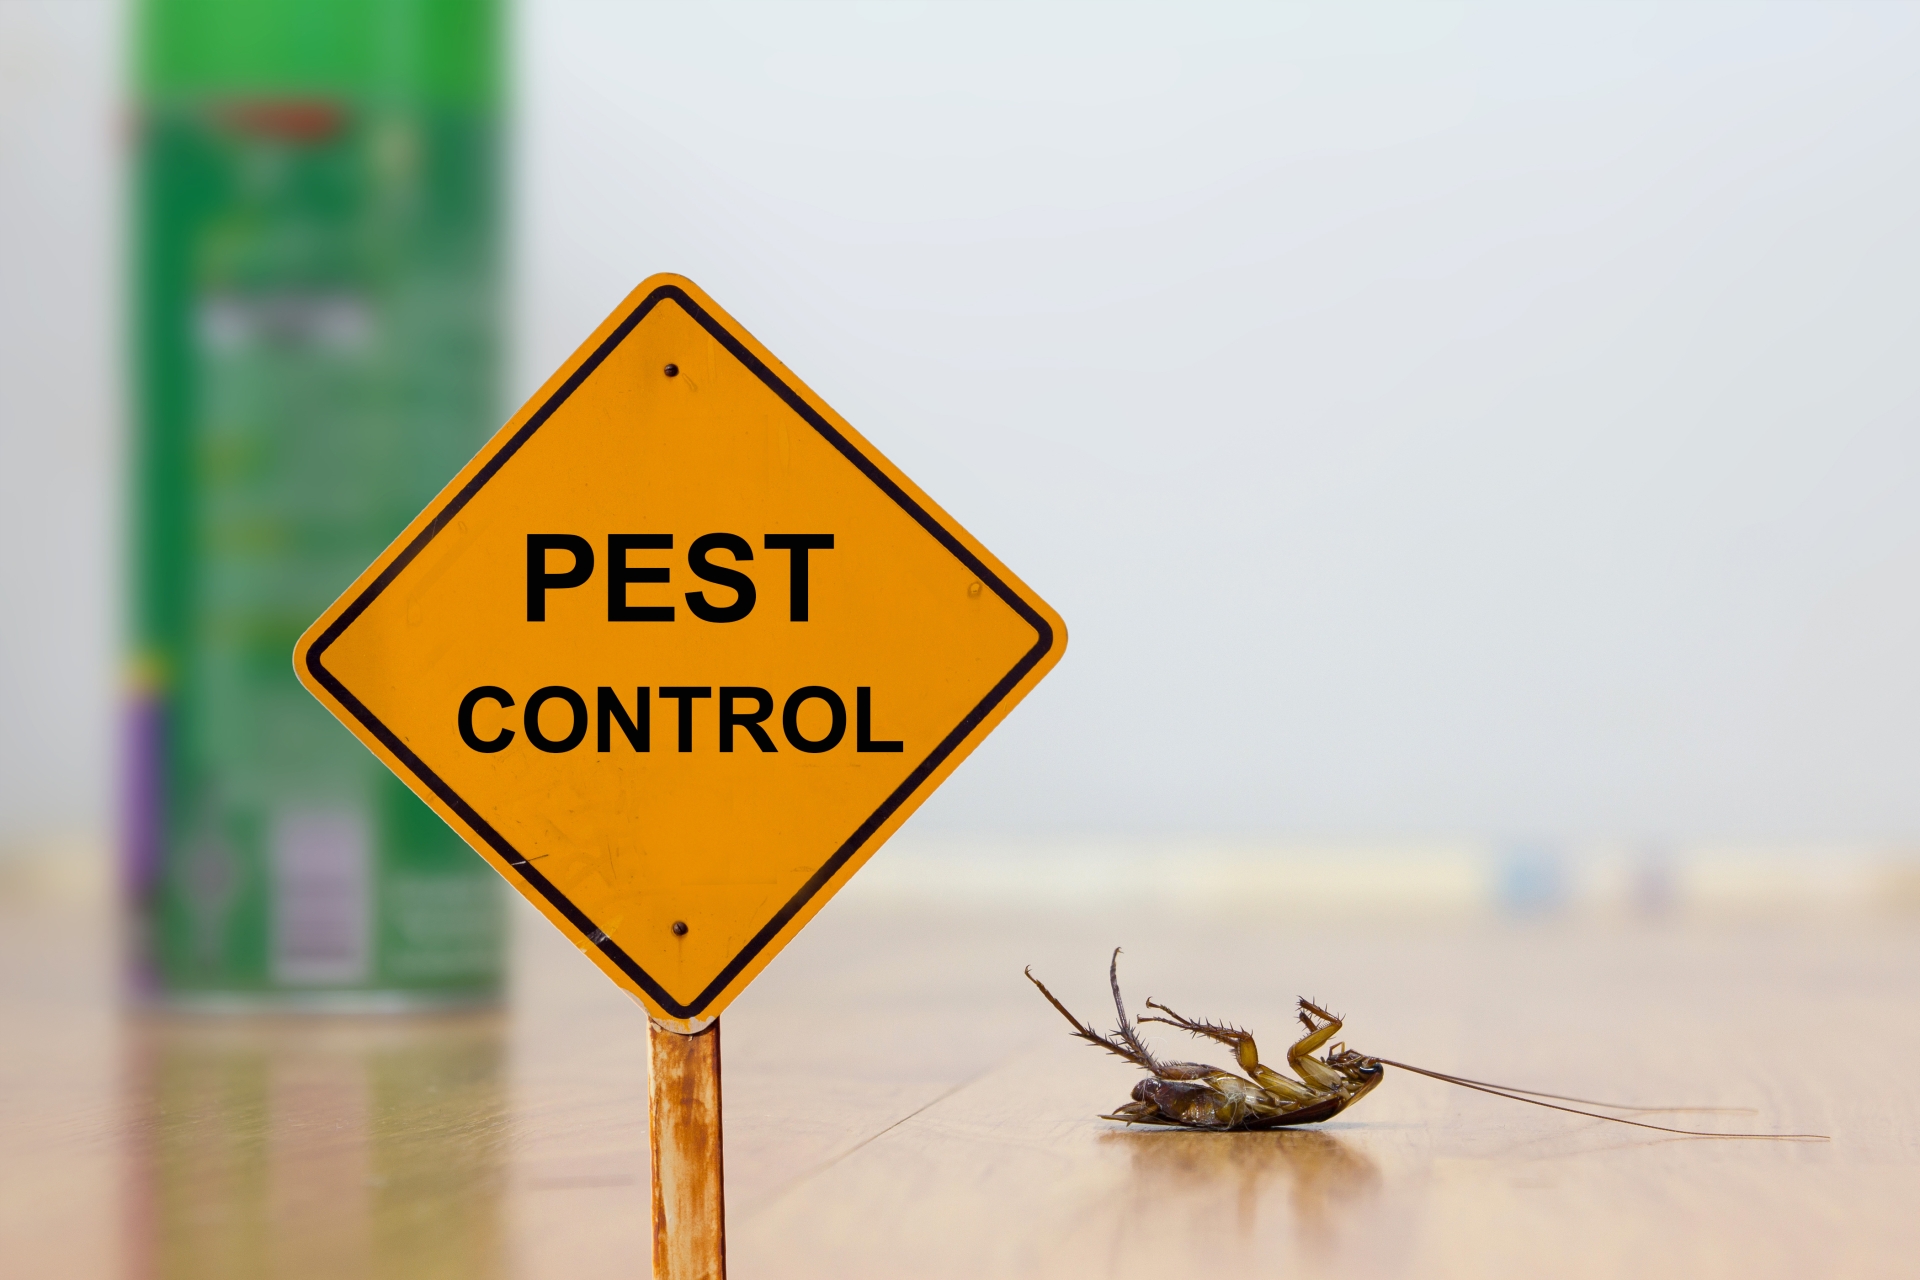 24 Hour Pest Control, Pest Control in Hounslow, Lampton, TW3. Call Now 020 8166 9746